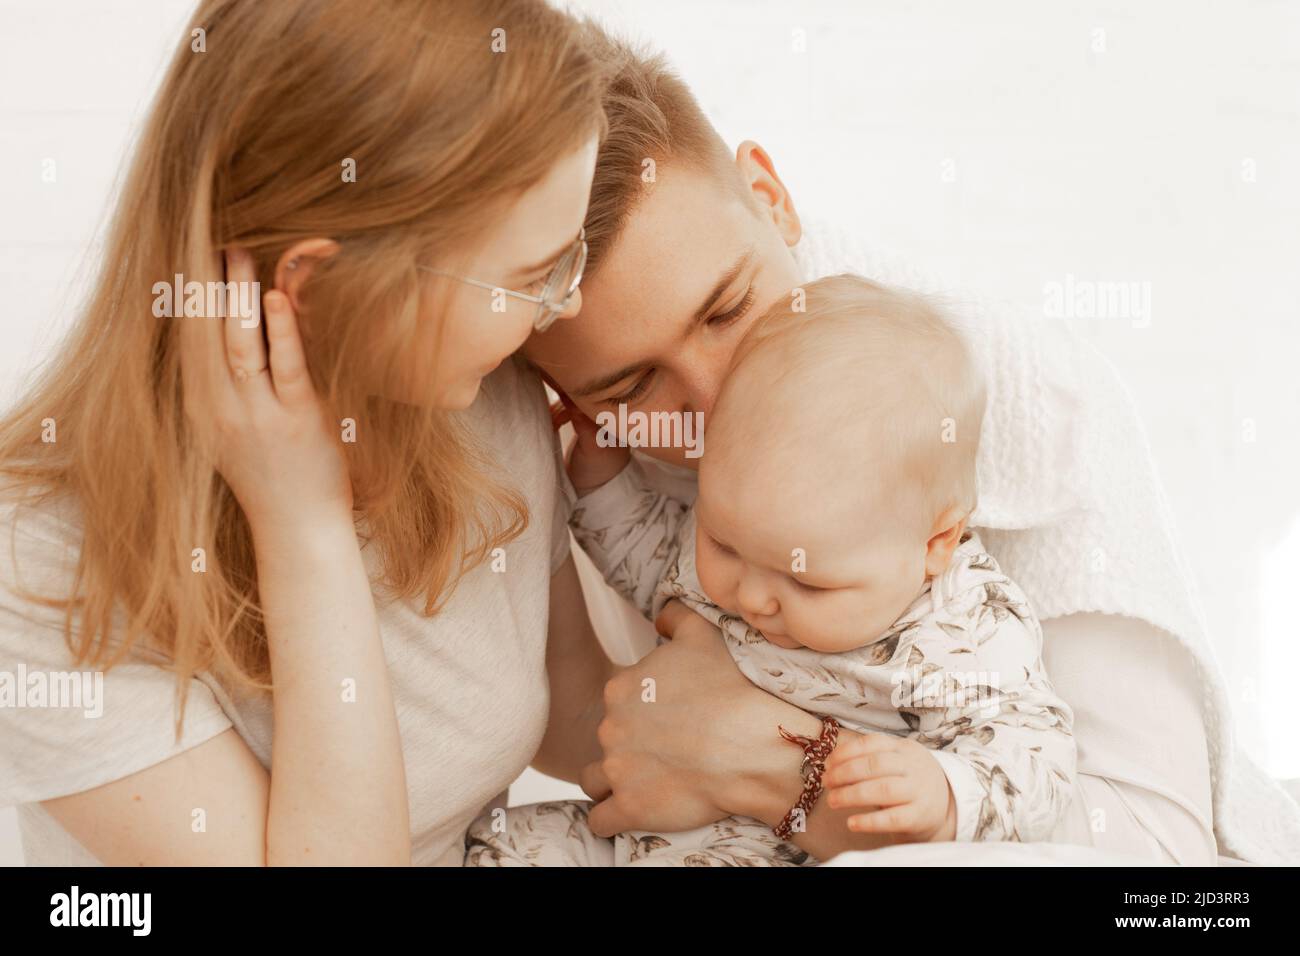 Young mother and father embrace little baby, have fun and enjoy on white background. Cute relationship between parents and infant child closeup, free Stock Photo